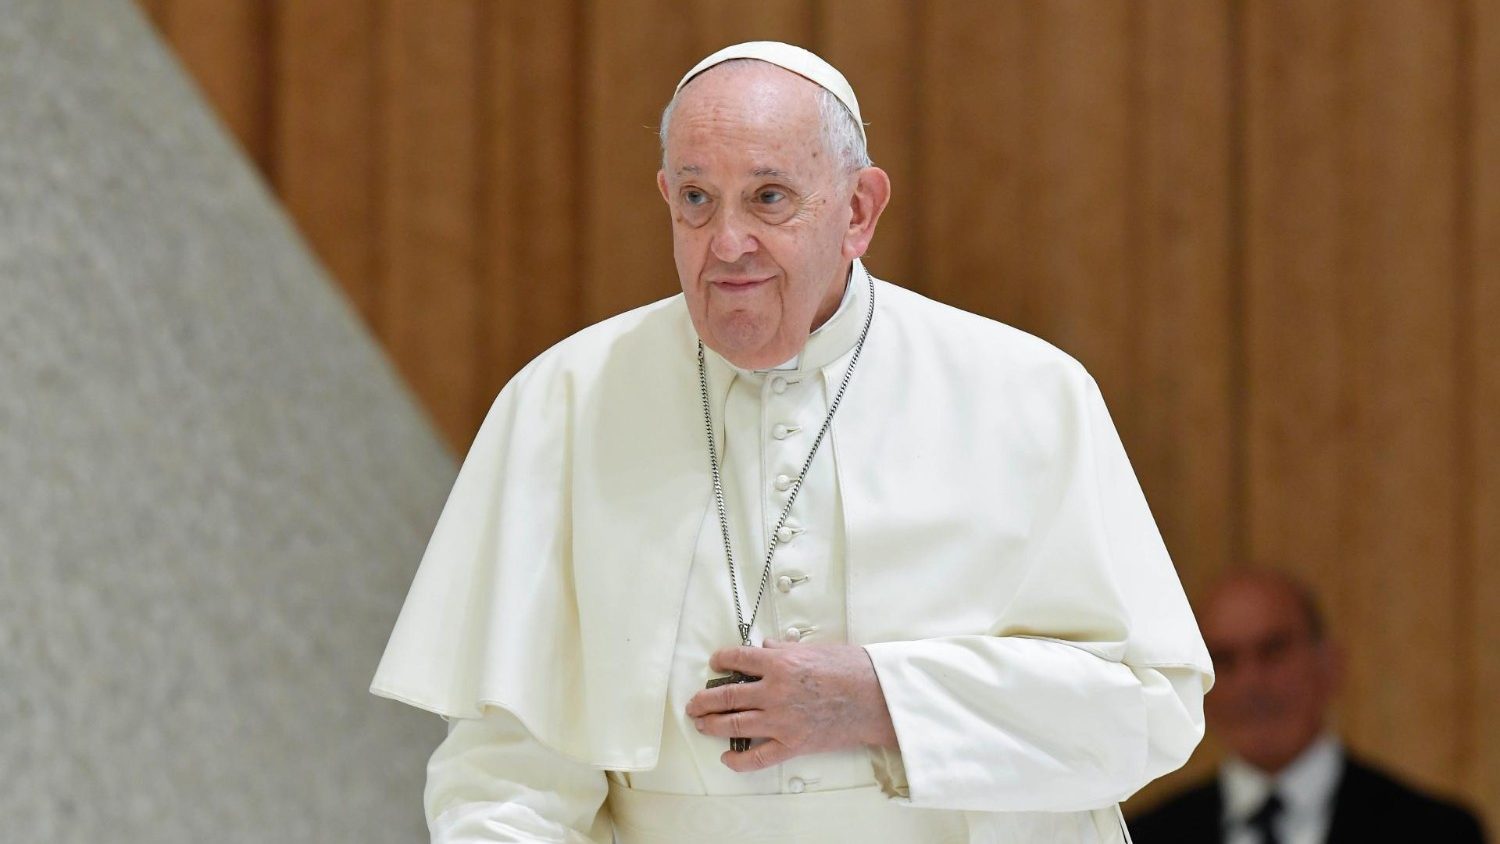 Pope Francis to speak at Clinton Global Initiative – Vatican News